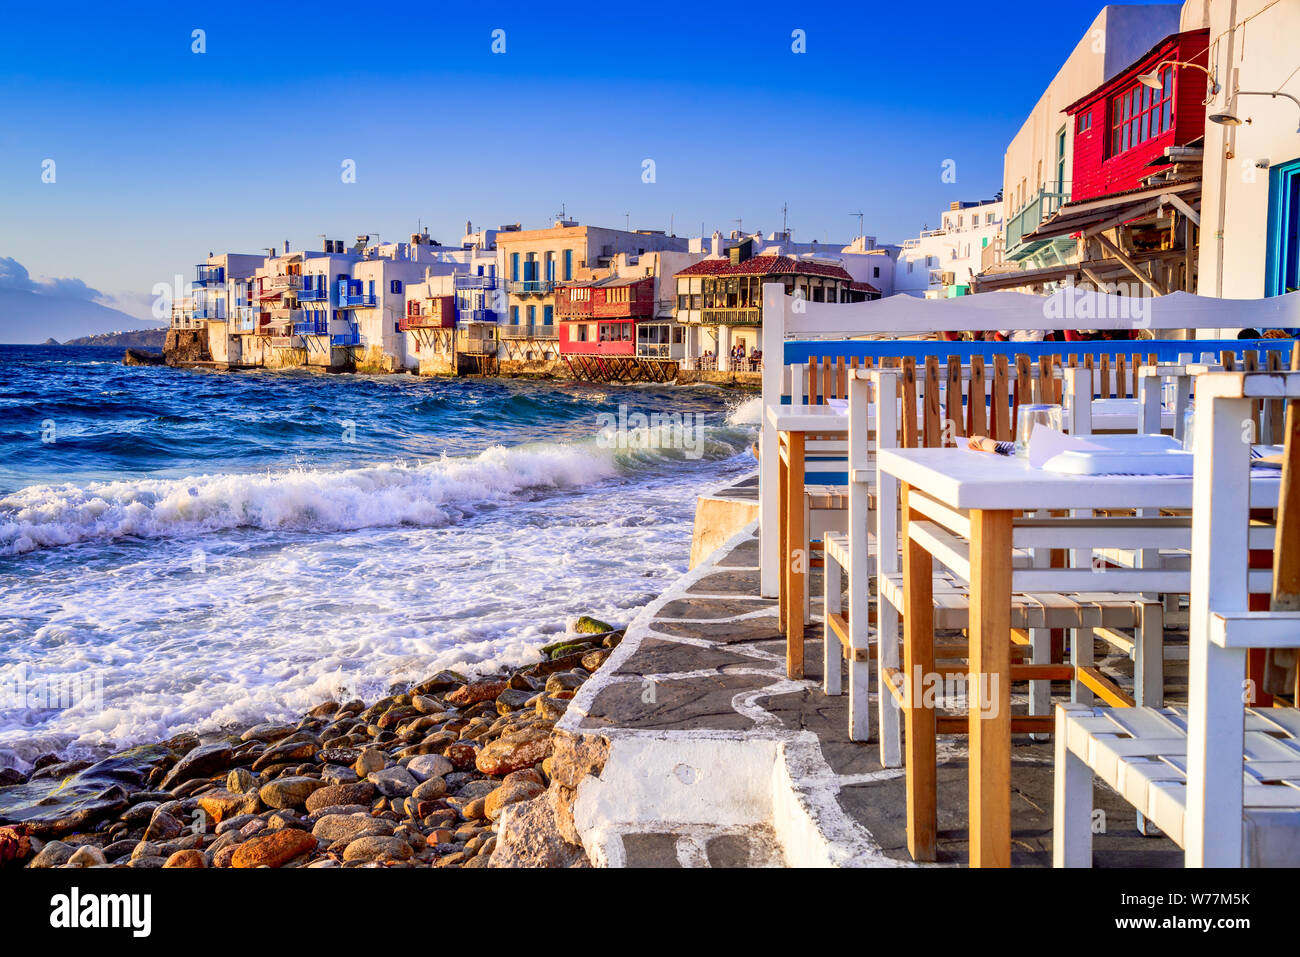 Mykonos, Greece. Little Venice waterfront houses, considered one of the most romantic places on the Cyclades Islands. Stock Photo